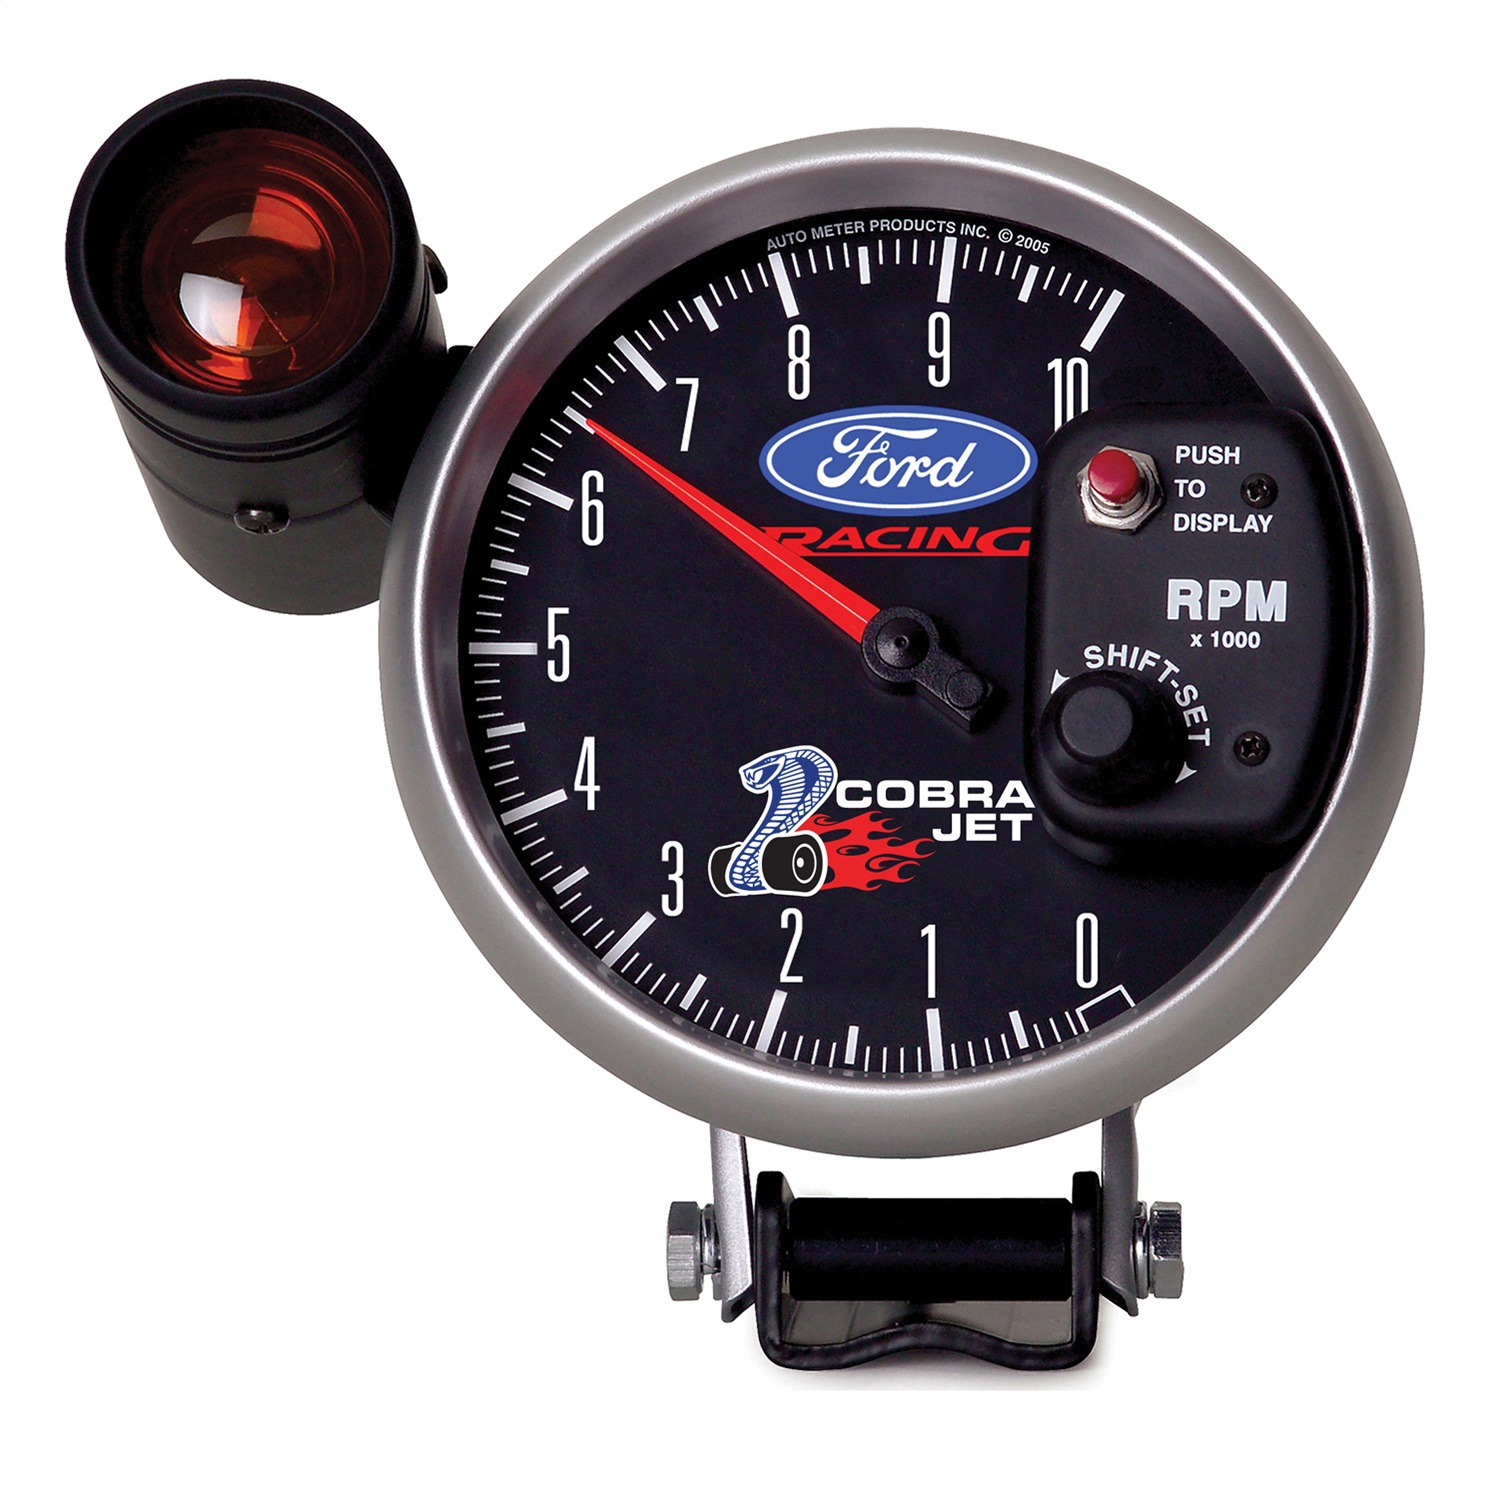 Auto Meter Auto Meter 880281 Ford Racing Series; Shift Light Tachometer